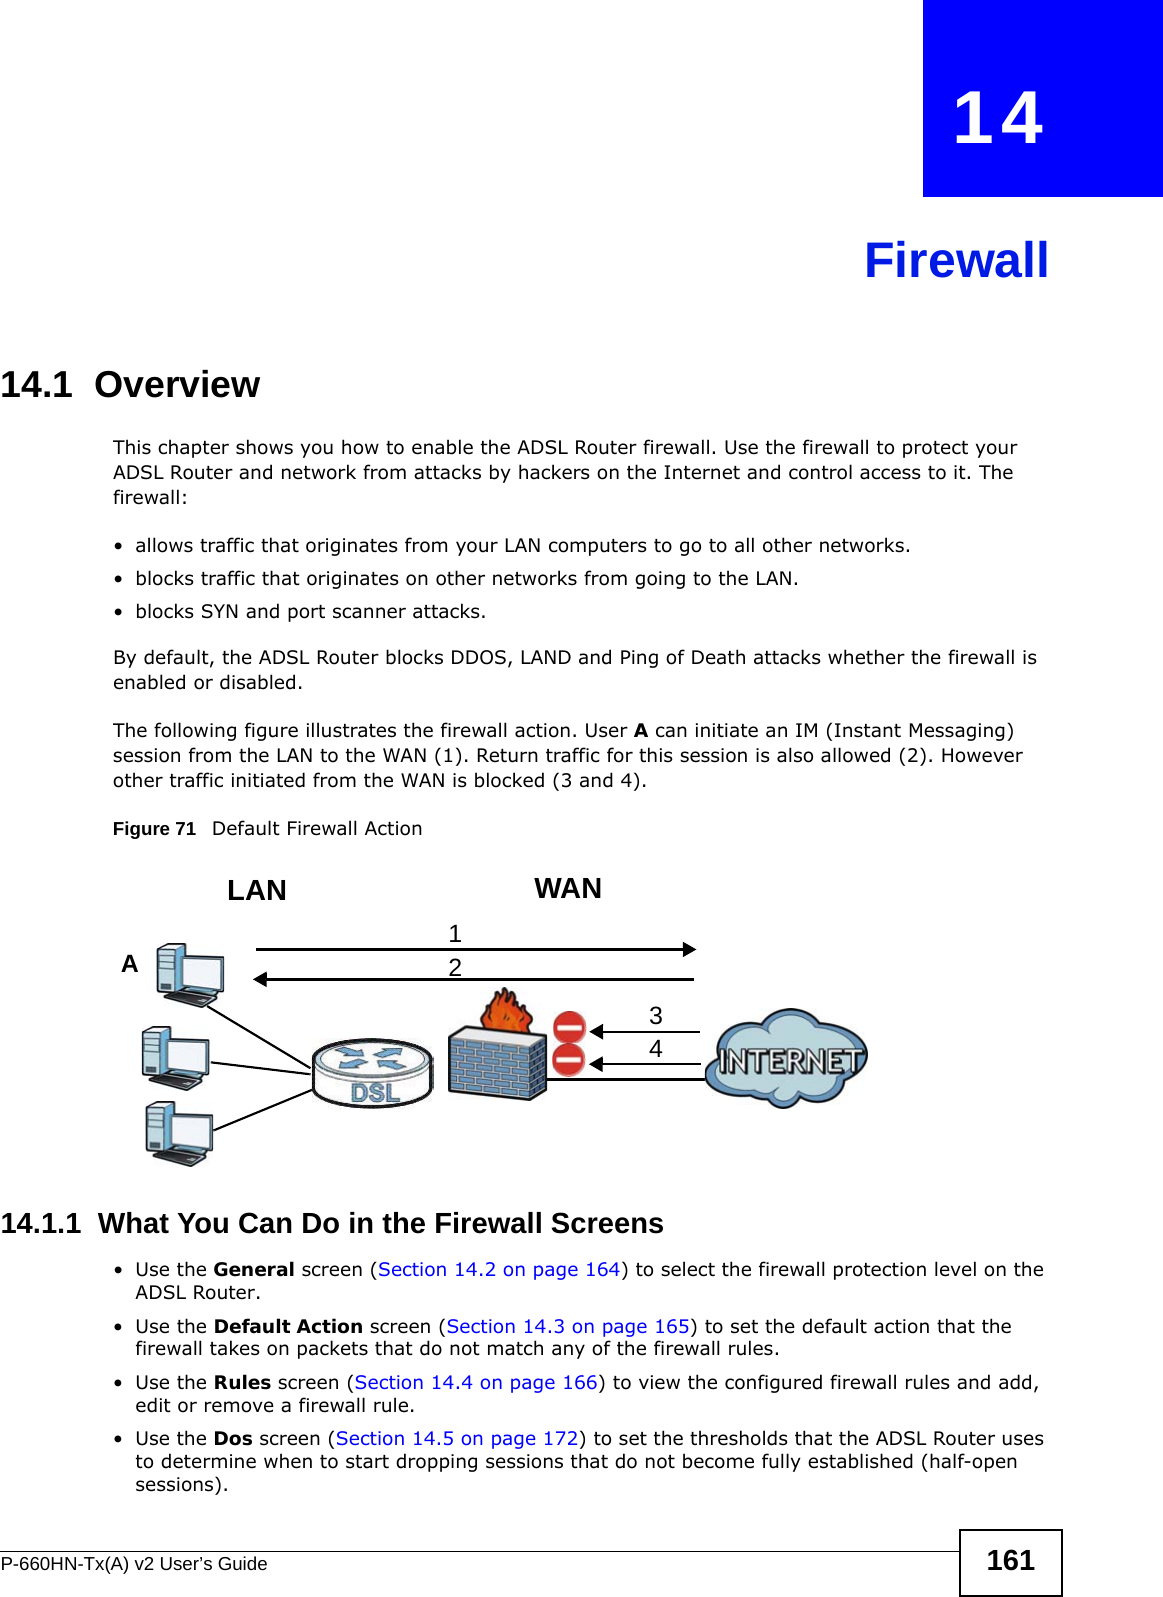 P-660HN-Tx(A) v2 User’s Guide 161CHAPTER   14Firewall14.1  OverviewThis chapter shows you how to enable the ADSL Router firewall. Use the firewall to protect your ADSL Router and network from attacks by hackers on the Internet and control access to it. The firewall:• allows traffic that originates from your LAN computers to go to all other networks. • blocks traffic that originates on other networks from going to the LAN.• blocks SYN and port scanner attacks.By default, the ADSL Router blocks DDOS, LAND and Ping of Death attacks whether the firewall is enabled or disabled.The following figure illustrates the firewall action. User A can initiate an IM (Instant Messaging) session from the LAN to the WAN (1). Return traffic for this session is also allowed (2). However other traffic initiated from the WAN is blocked (3 and 4).Figure 71   Default Firewall Action14.1.1  What You Can Do in the Firewall Screens•Use the General screen (Section 14.2 on page 164) to select the firewall protection level on the ADSL Router.•Use the Default Action screen (Section 14.3 on page 165) to set the default action that the firewall takes on packets that do not match any of the firewall rules.•Use the Rules screen (Section 14.4 on page 166) to view the configured firewall rules and add, edit or remove a firewall rule.•Use the Dos screen (Section 14.5 on page 172) to set the thresholds that the ADSL Router uses to determine when to start dropping sessions that do not become fully established (half-open sessions).WANLAN3412A